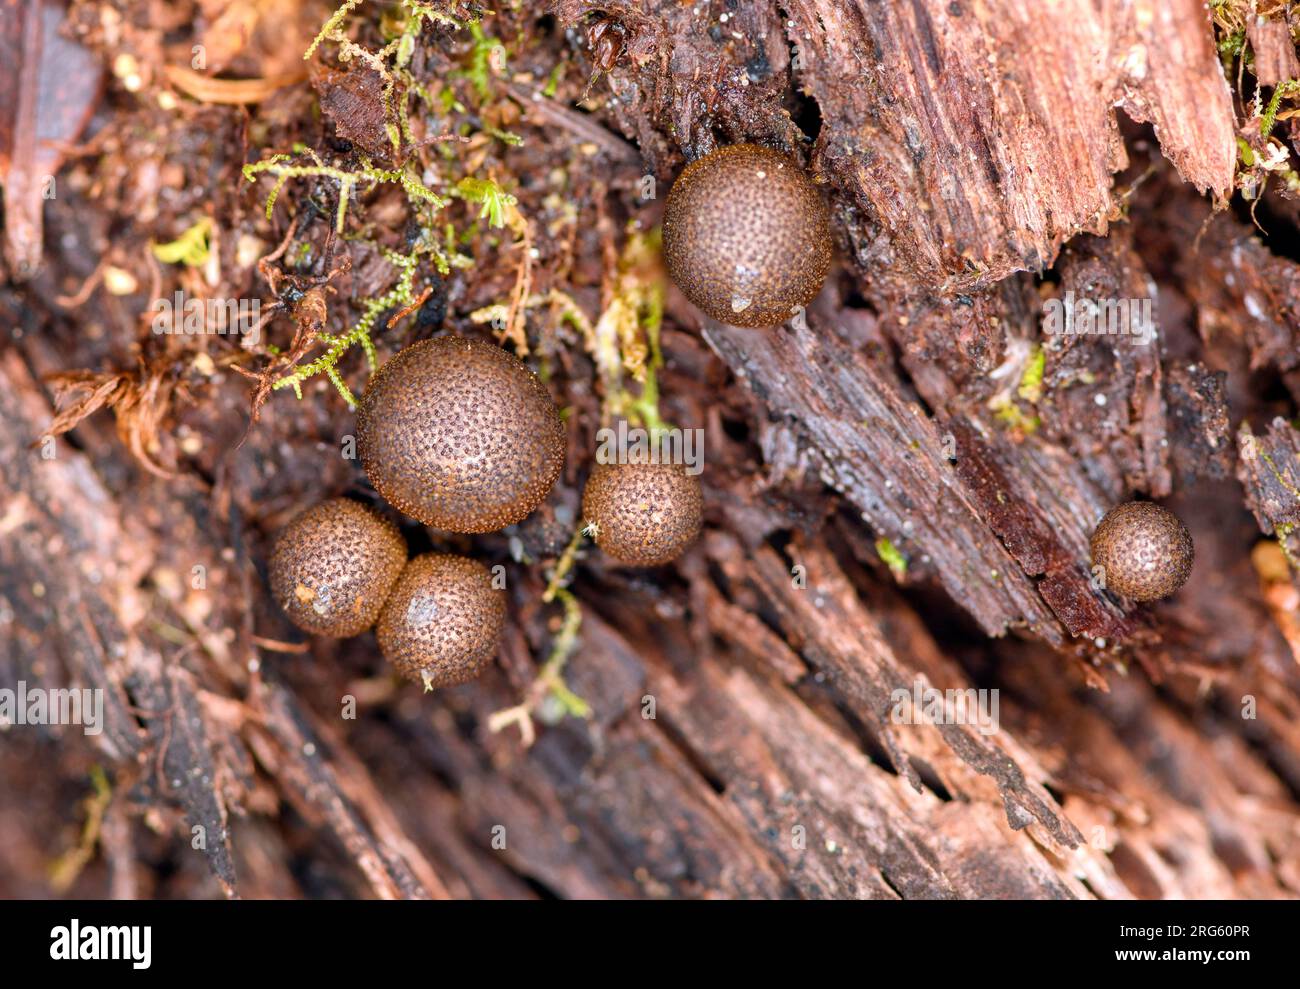 Wolf's milk (Lycogala epidendrum), a slime mould from the cloud forest of San Gerardo de Dota, Costa Rica at about 2400 meters elevation. Stock Photo